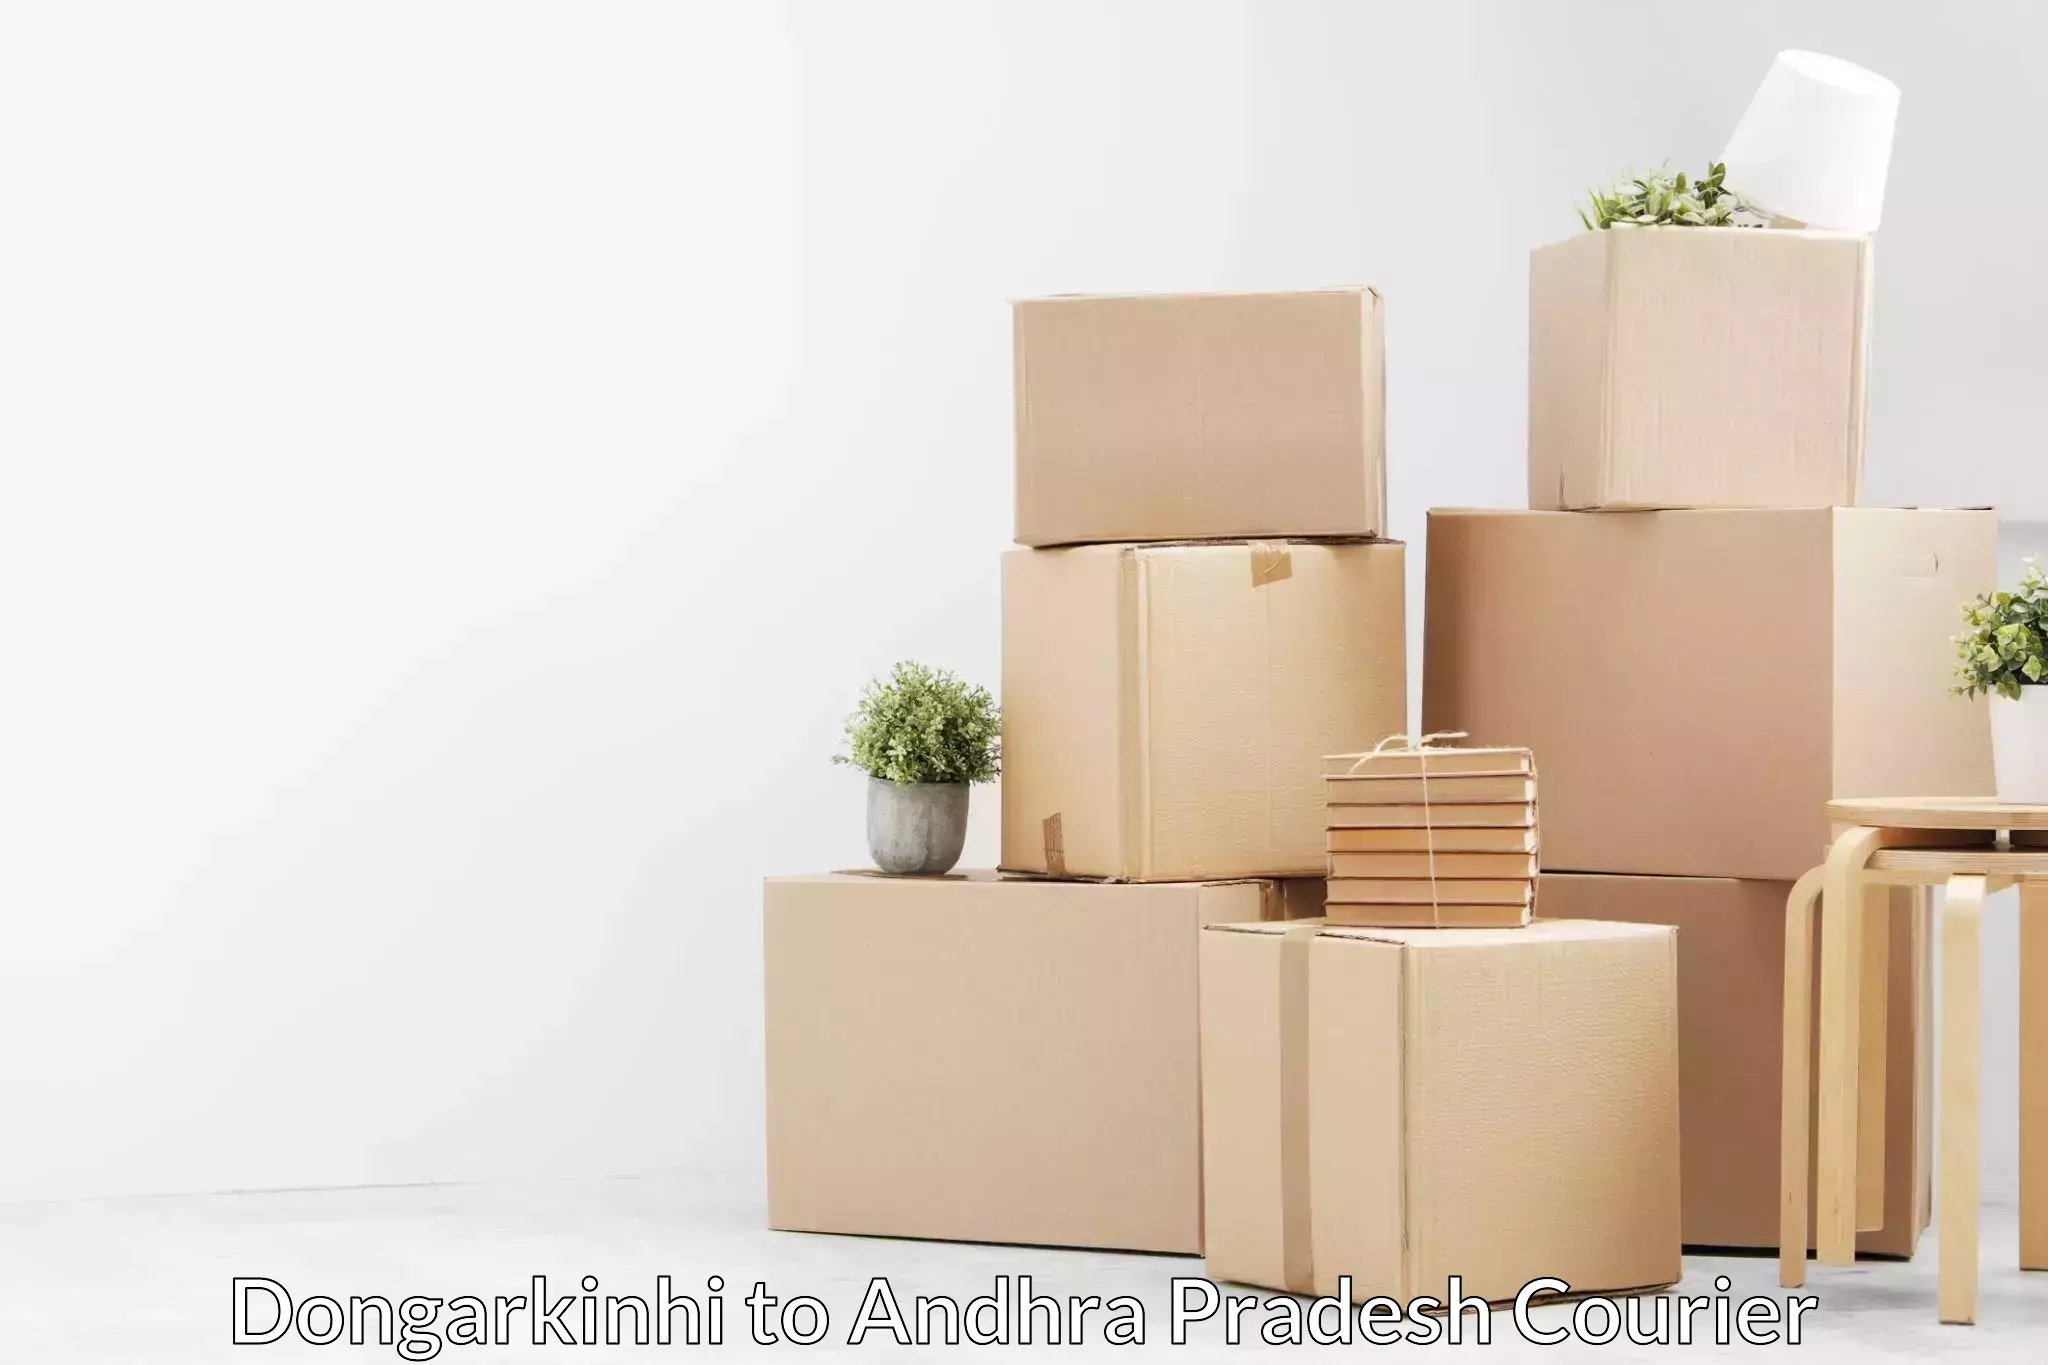 Trusted moving company in Dongarkinhi to Andhra Pradesh